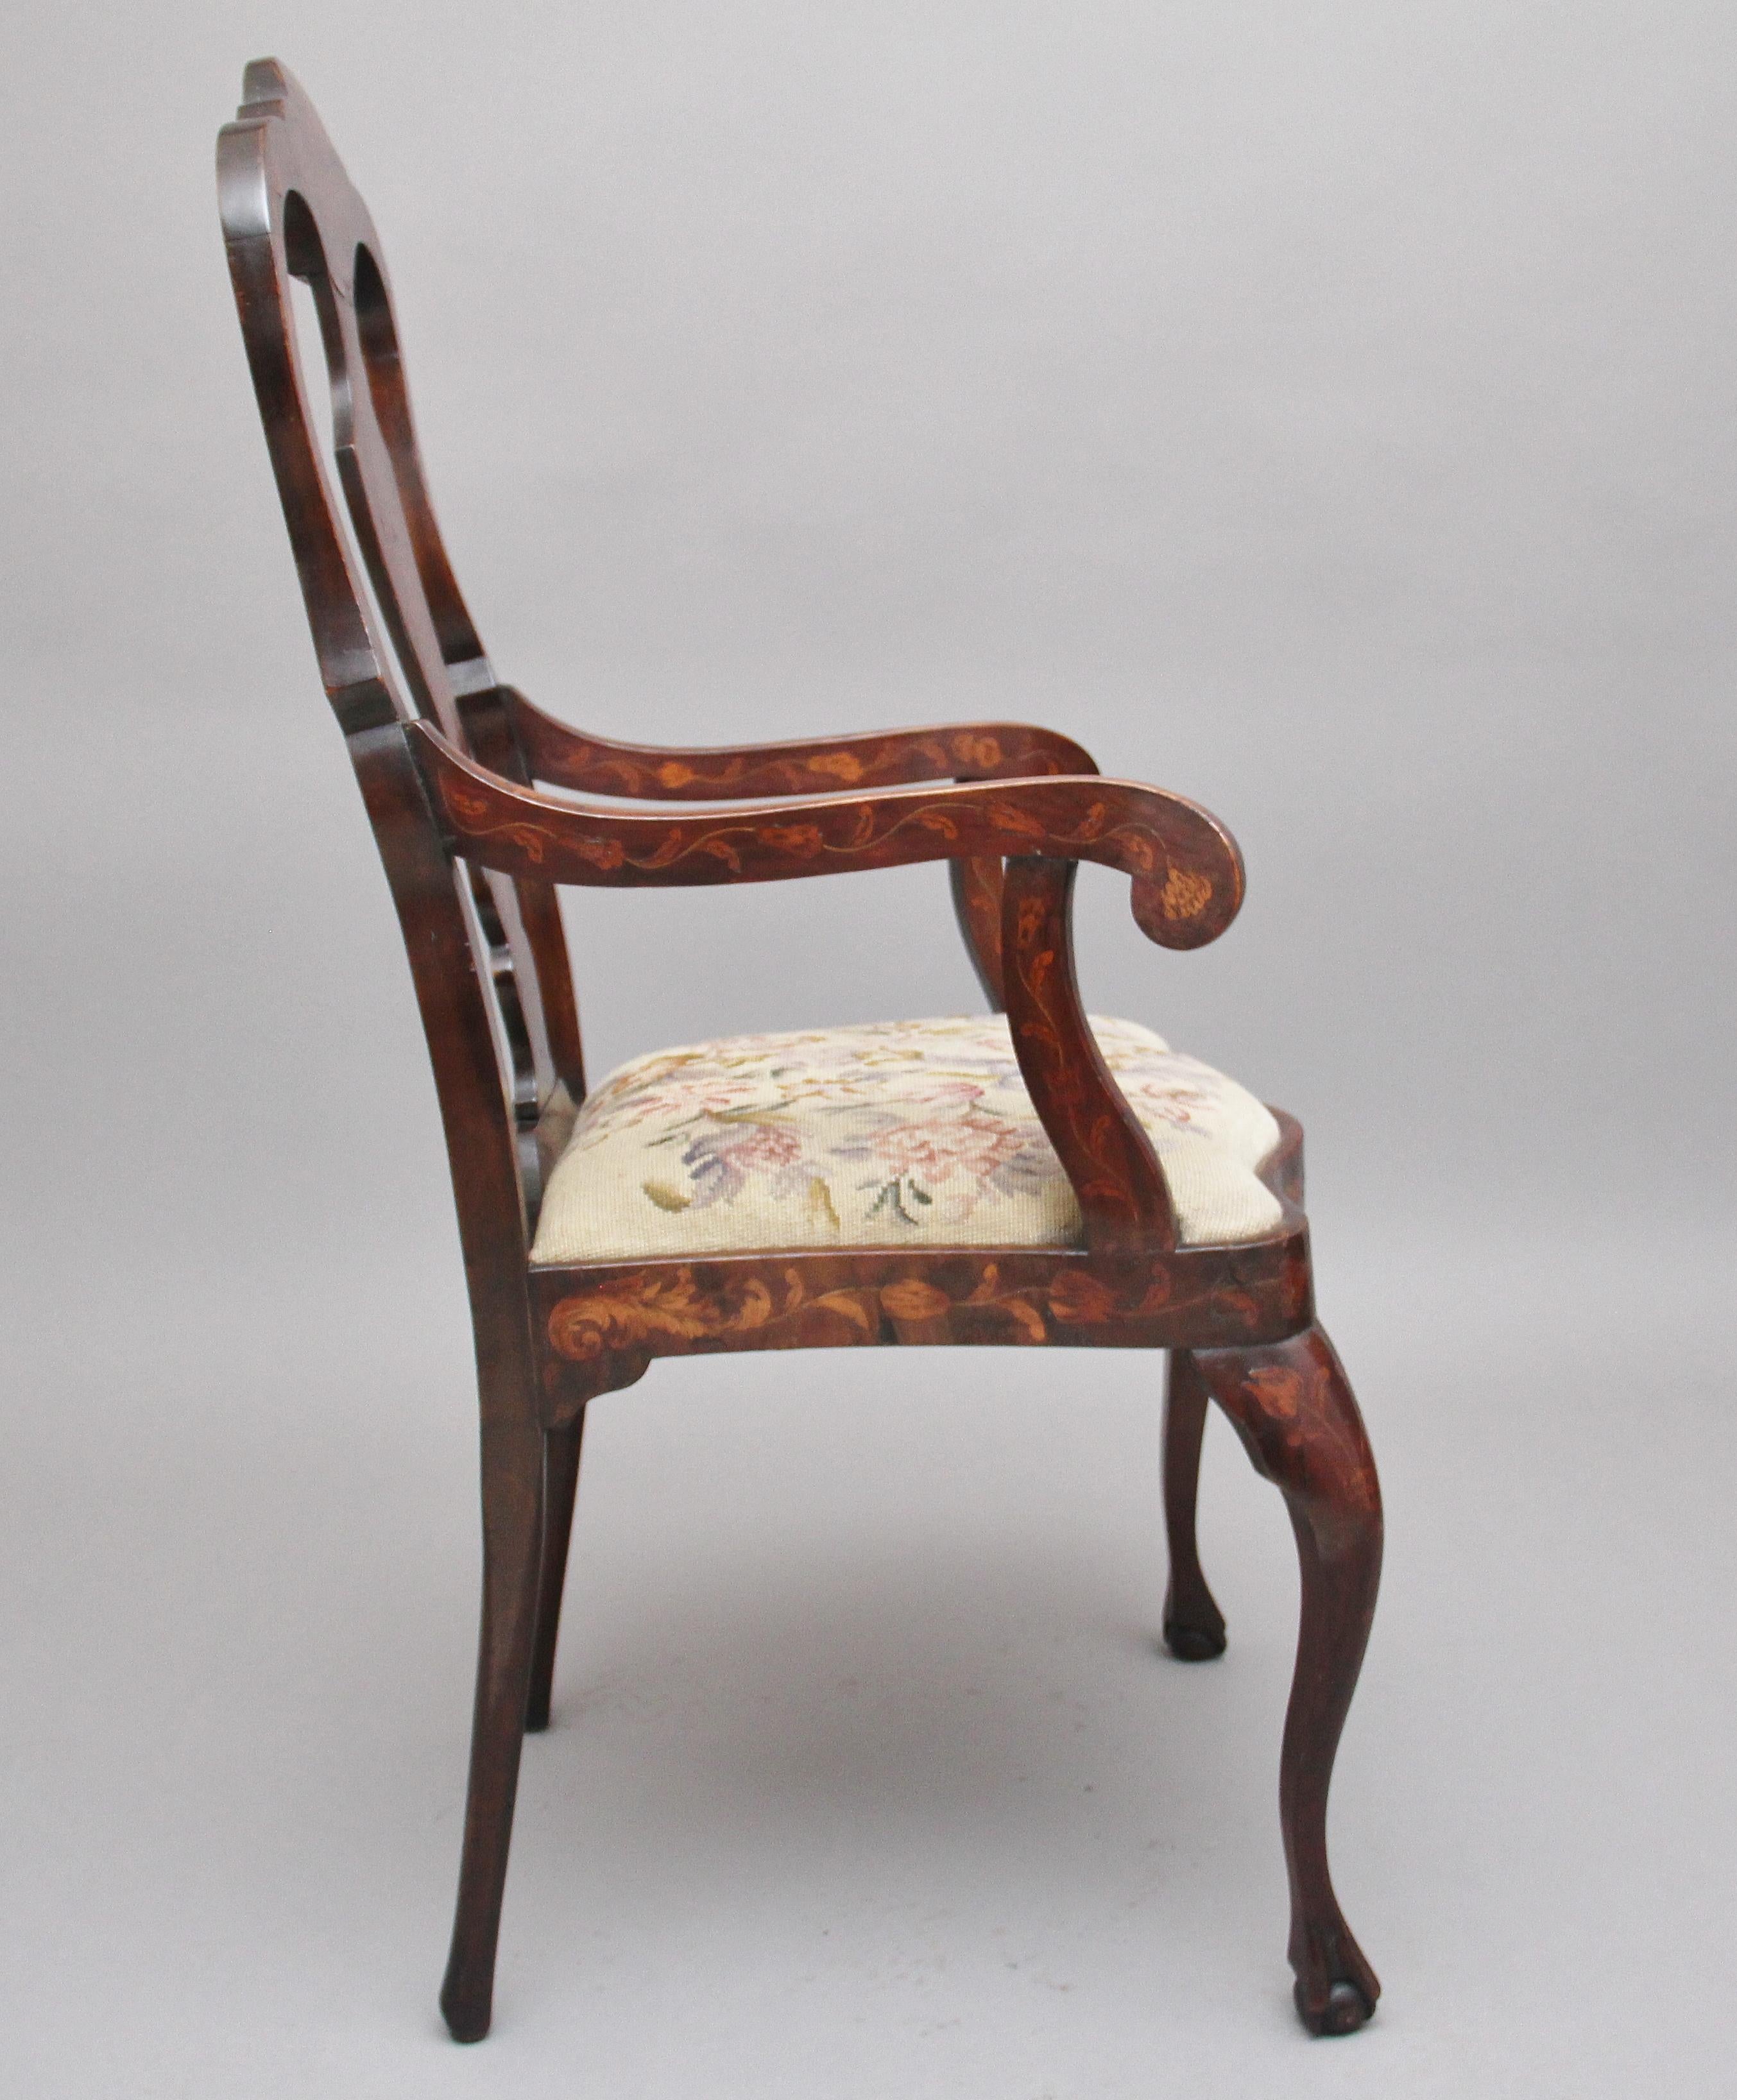 Early 19th century mahogany Dutch marquetry armchair, having an arched crest rail and vase shaped splat, elegant shaped arms and supports, drop in upholstered seat with a needlework floral pattern, standing on cabriole legs terminating on ball and